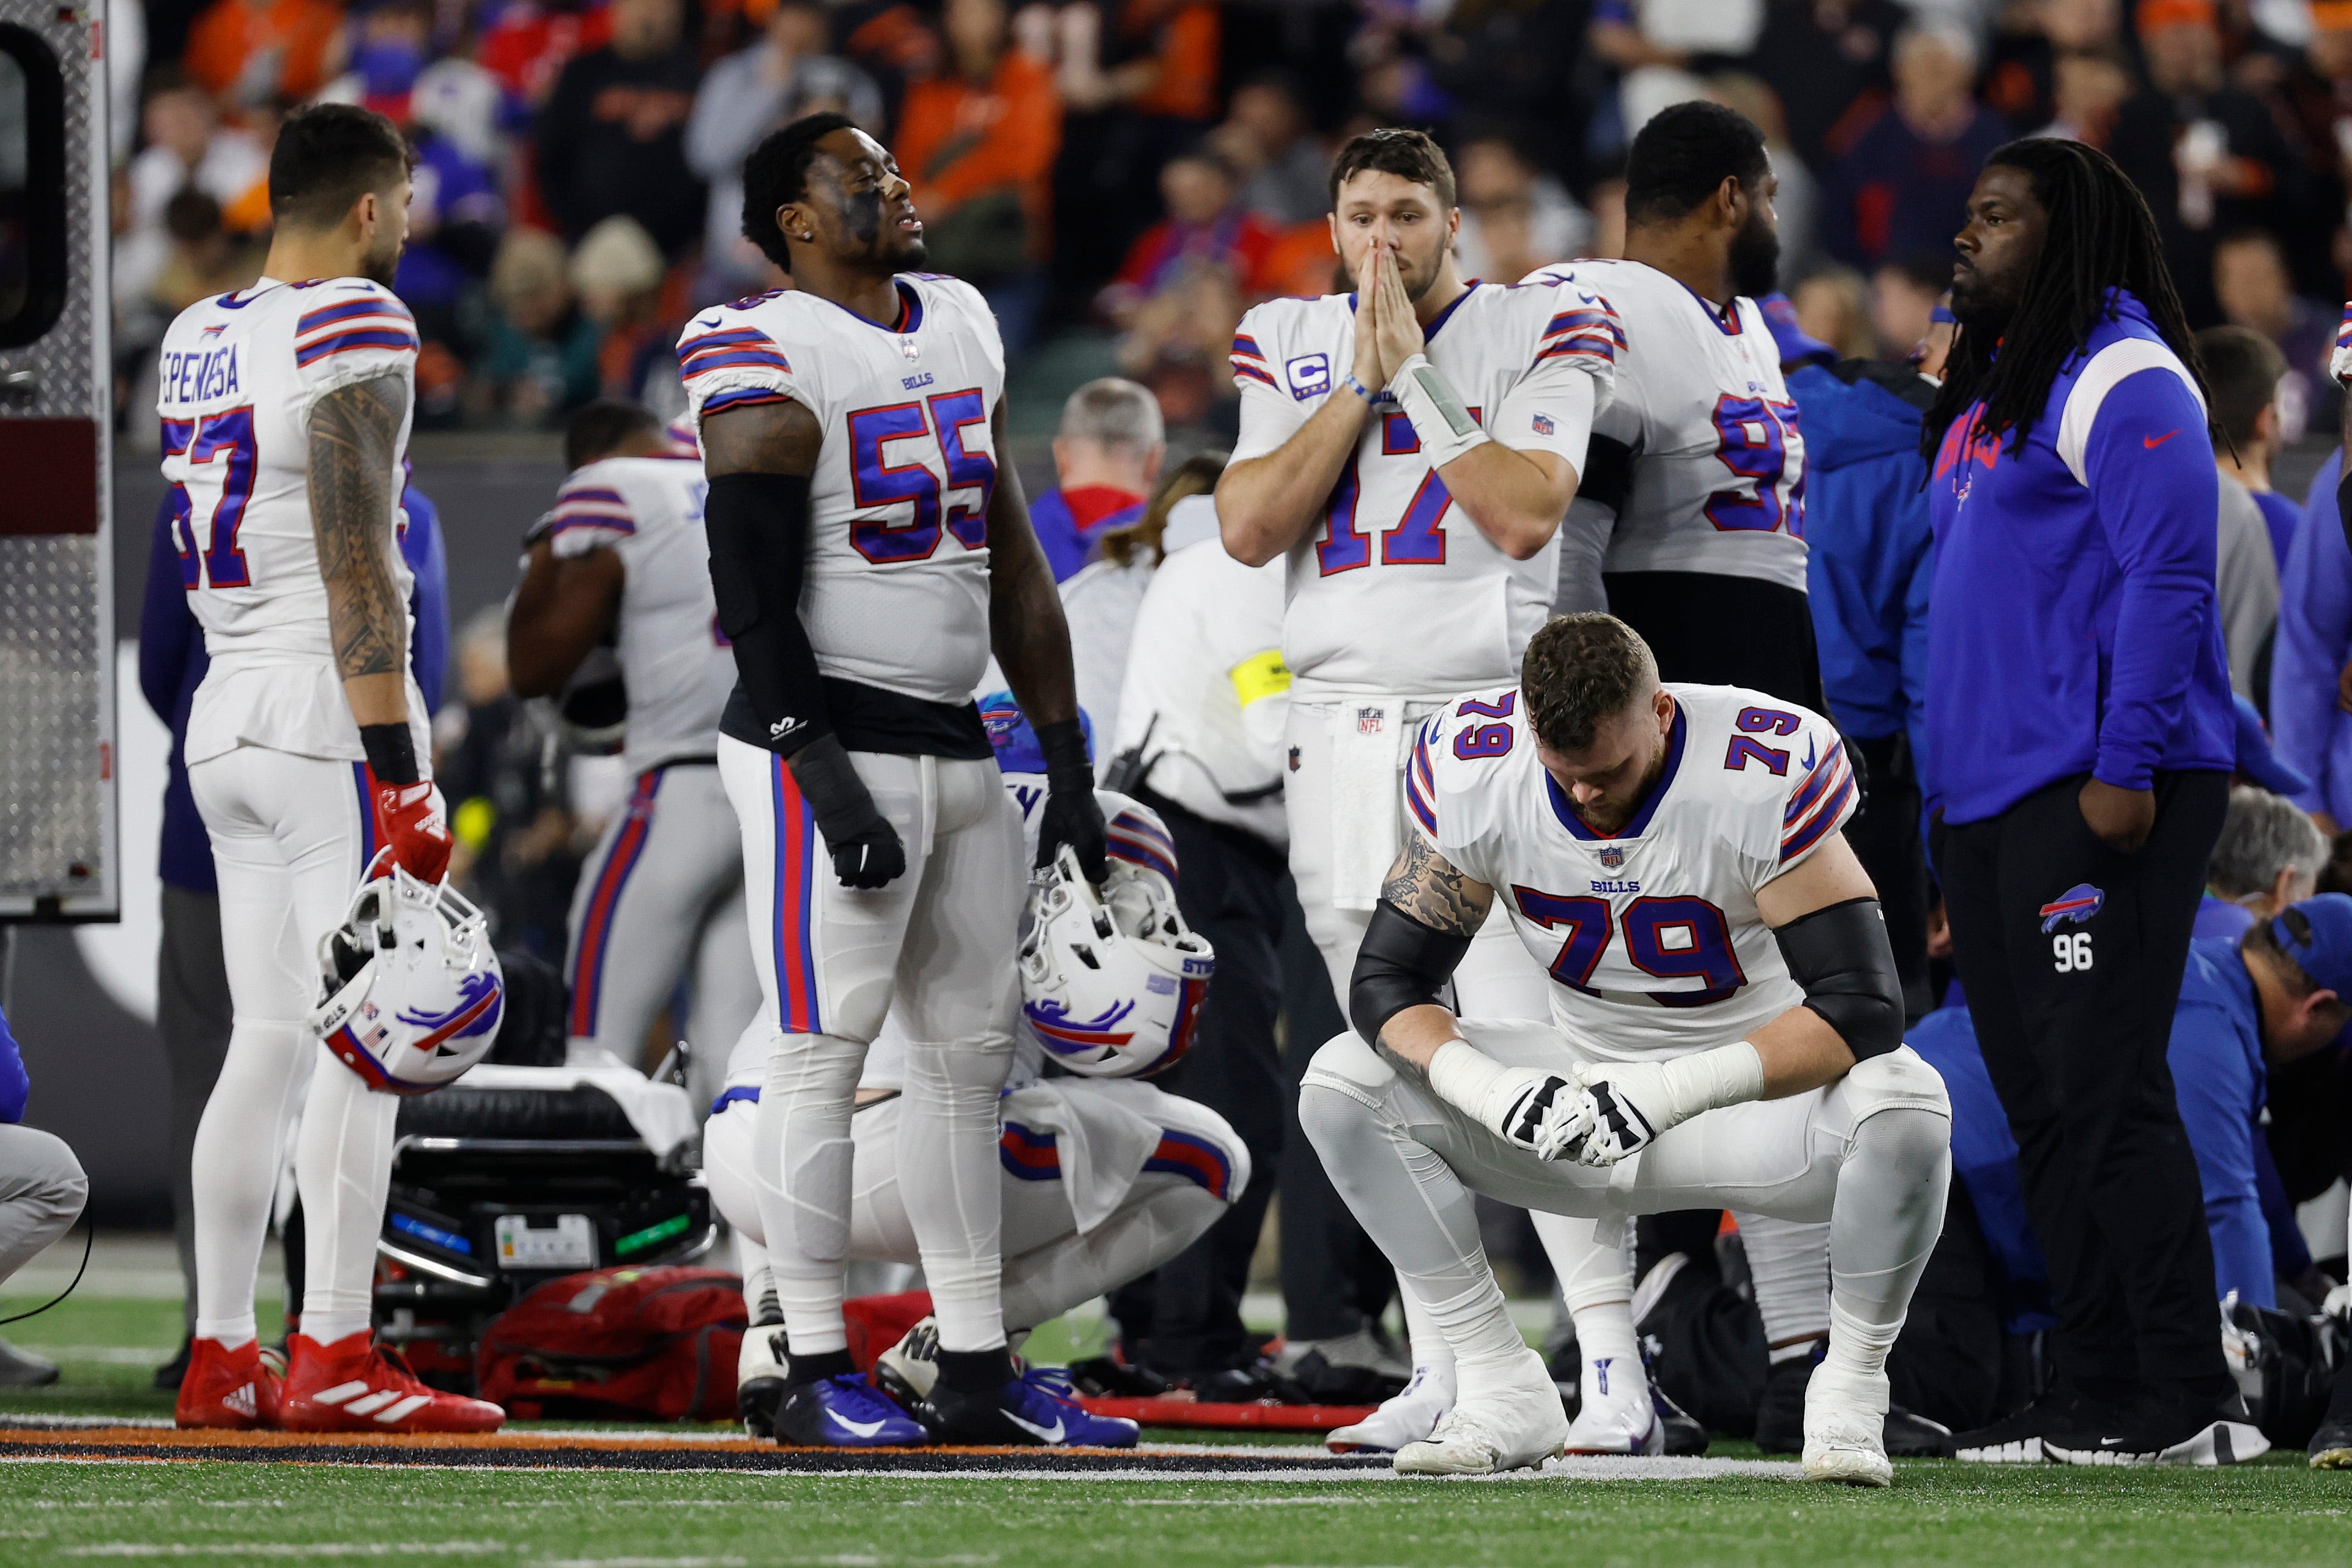 Tragic moment with Bills safety Damar Hamlin reminds us NFL players are human | Opinion